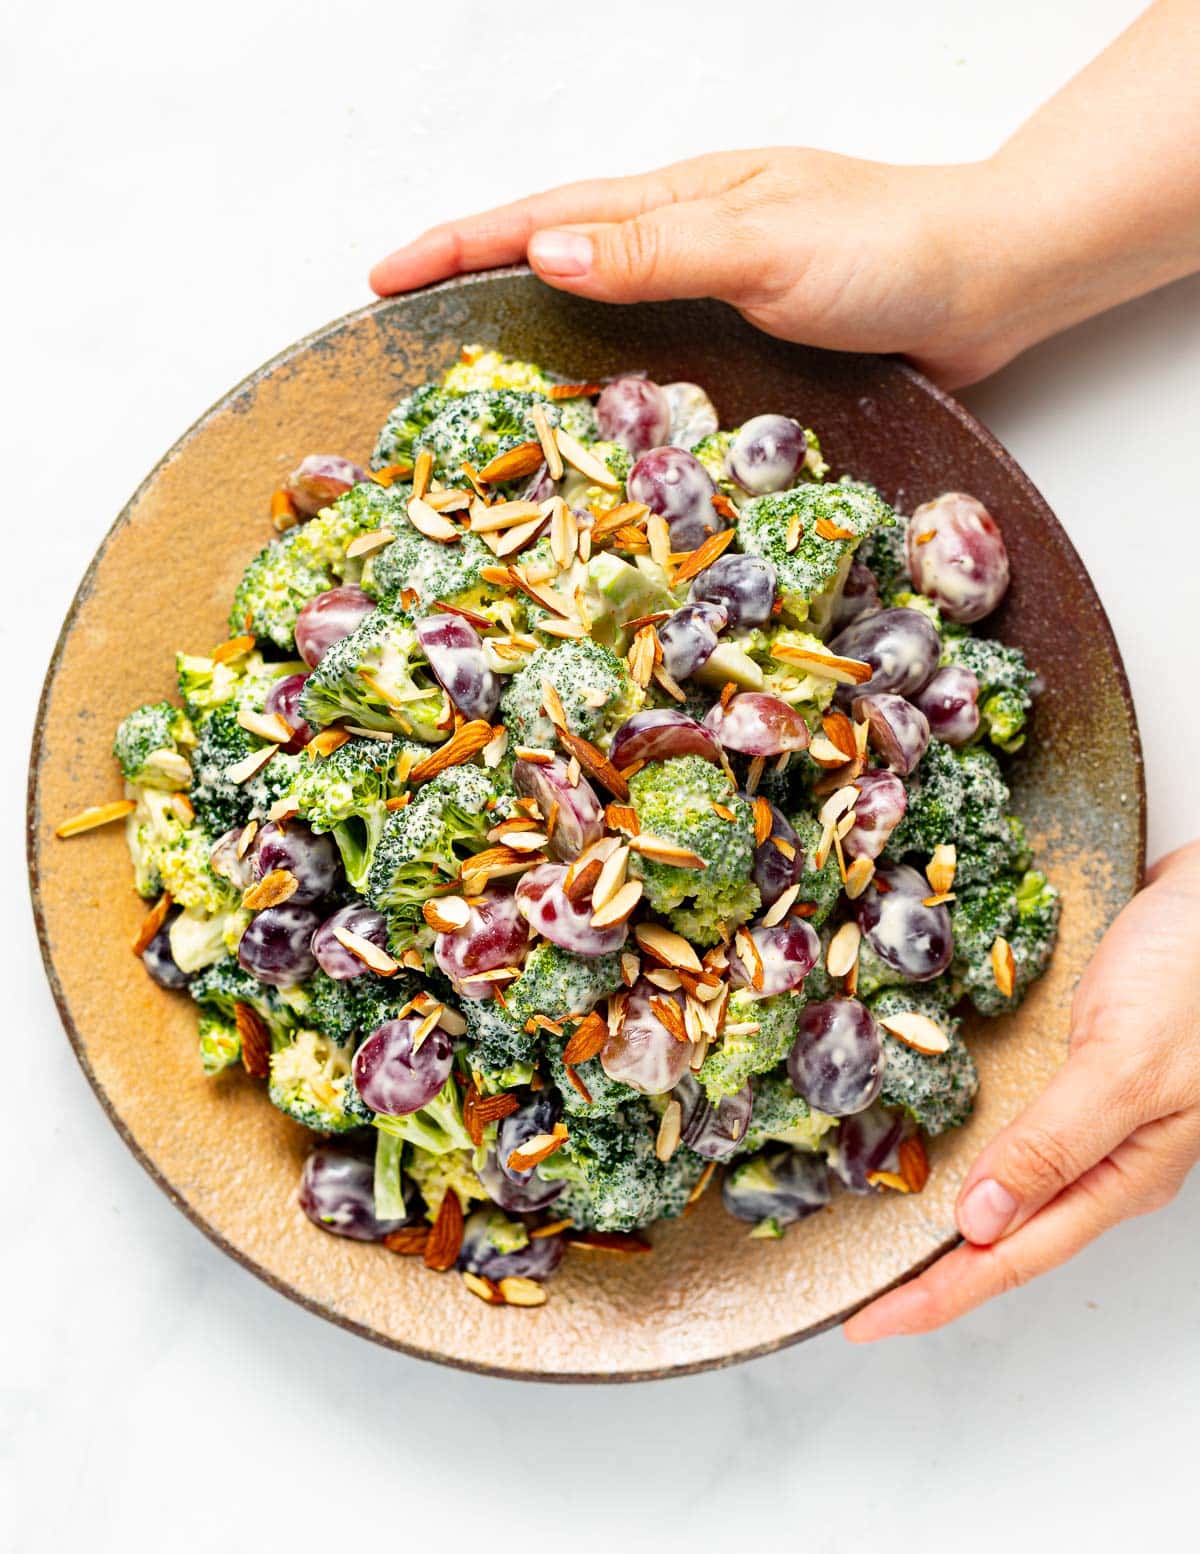 hands holding a rustic plate filled with vegan broccoli salad 